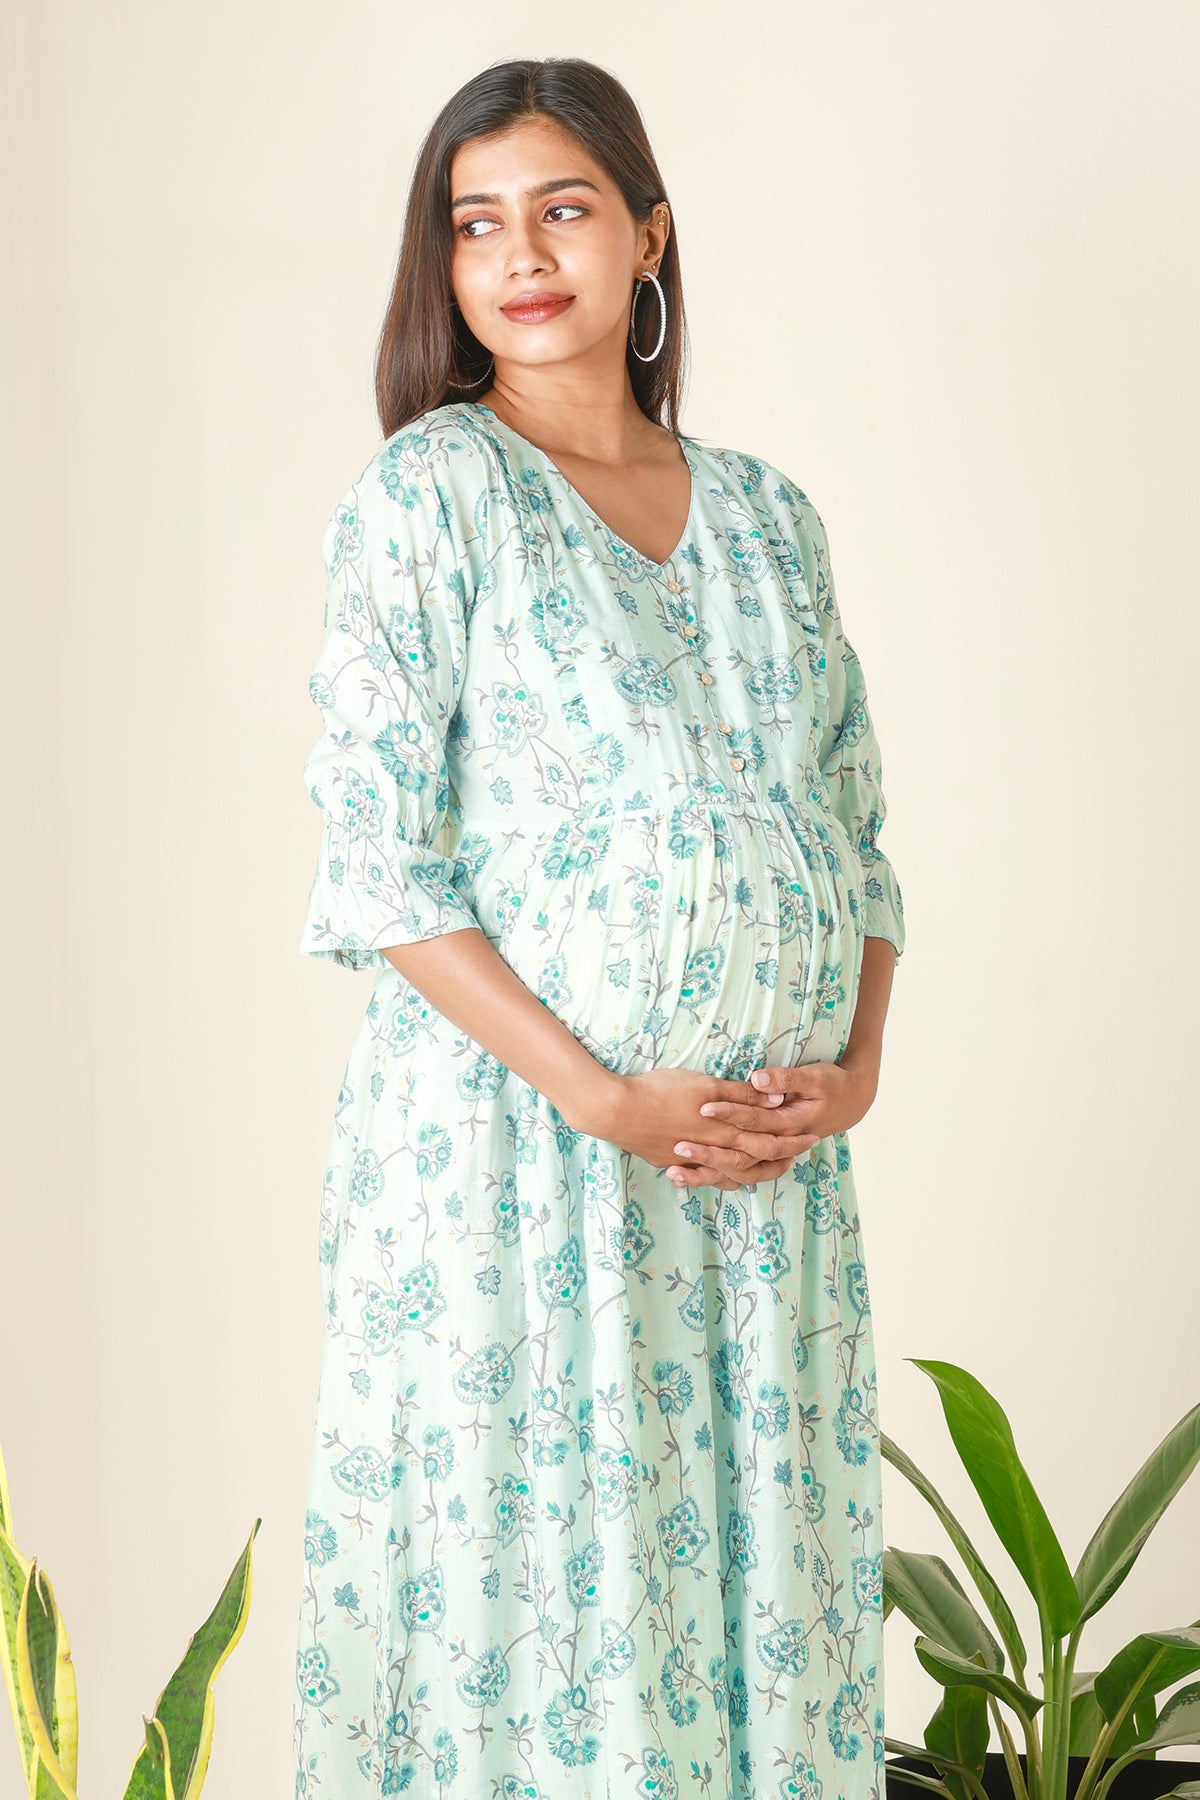 All Over Floral Printed Maternity Dress with Ruffled Yoke - Blue